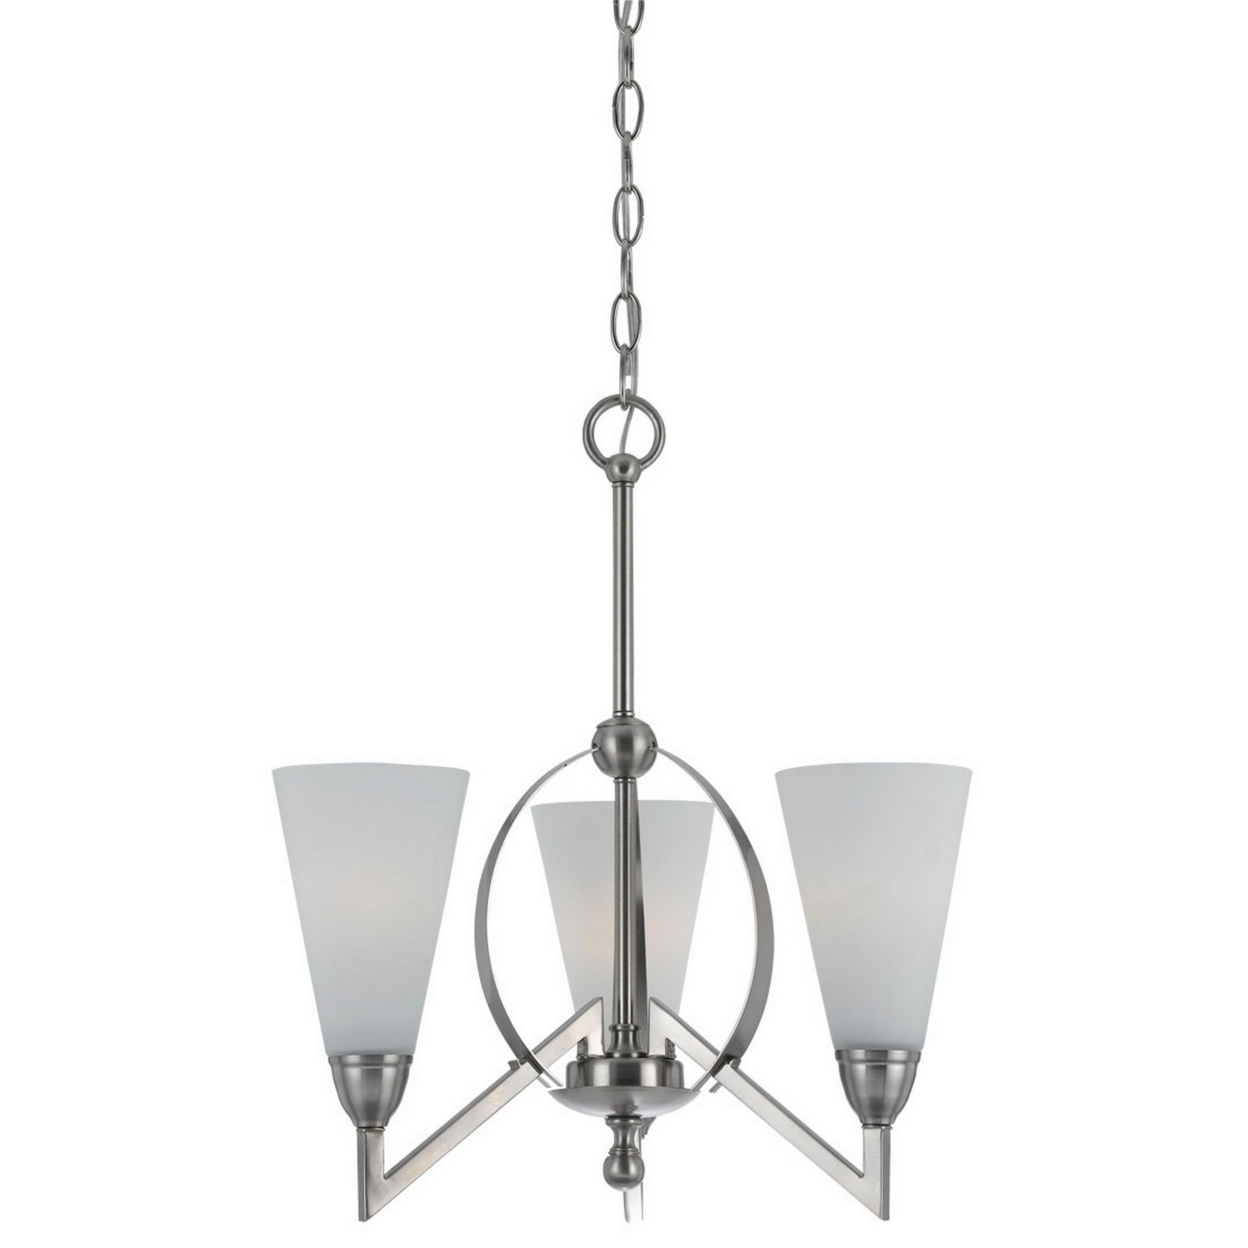 19 Inch 3 Light Chandelier With Frosted Glass Shade, Silver Finish, White- Saltoro Sherpi